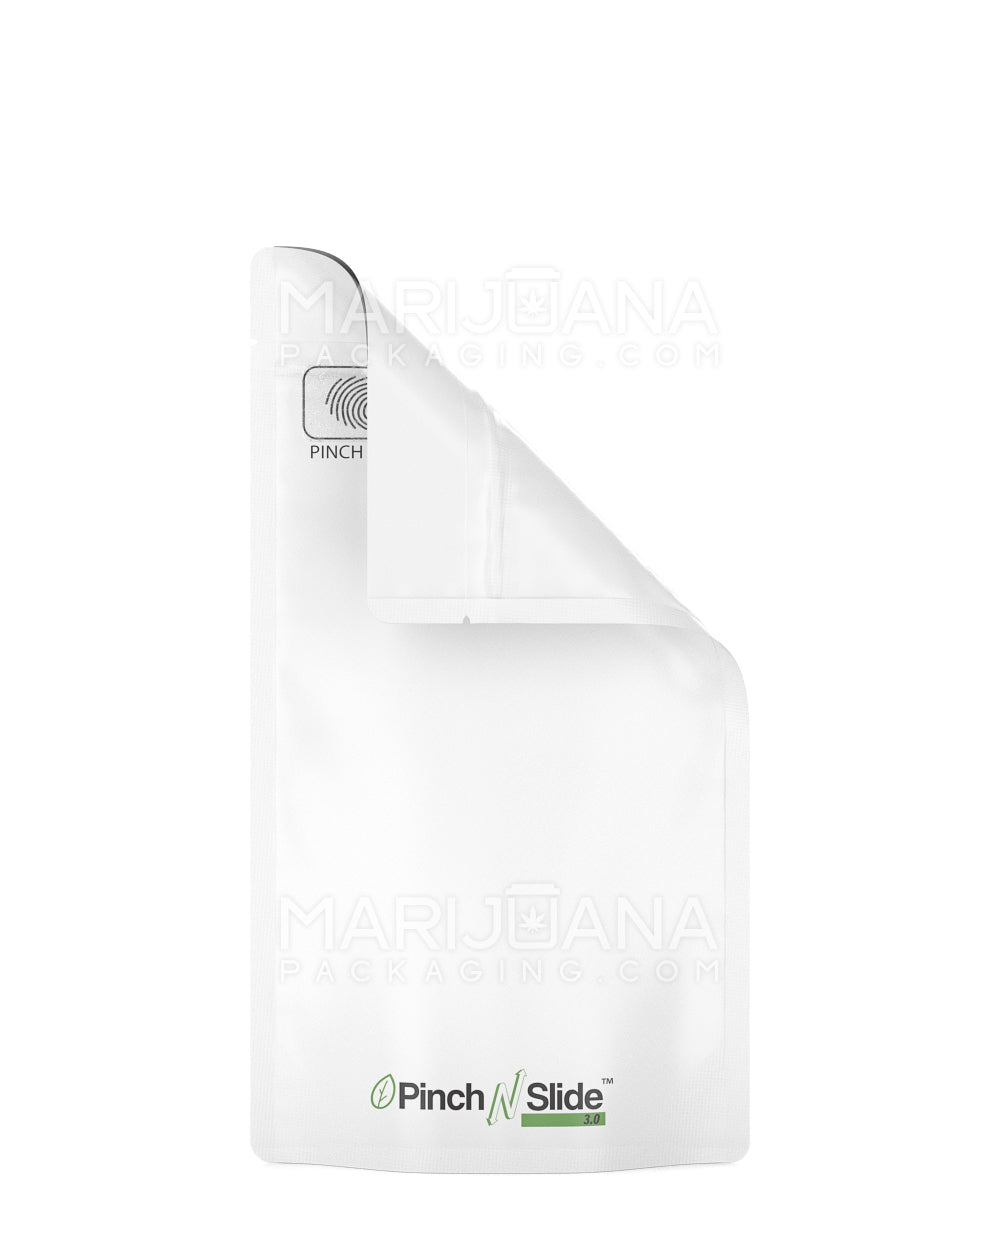 Child Resistant & Tamper Evident | Pinch N Slide 3.0 Matte White PCR Mylar Bags | 4in x 7.4in - 7g - 250 Count